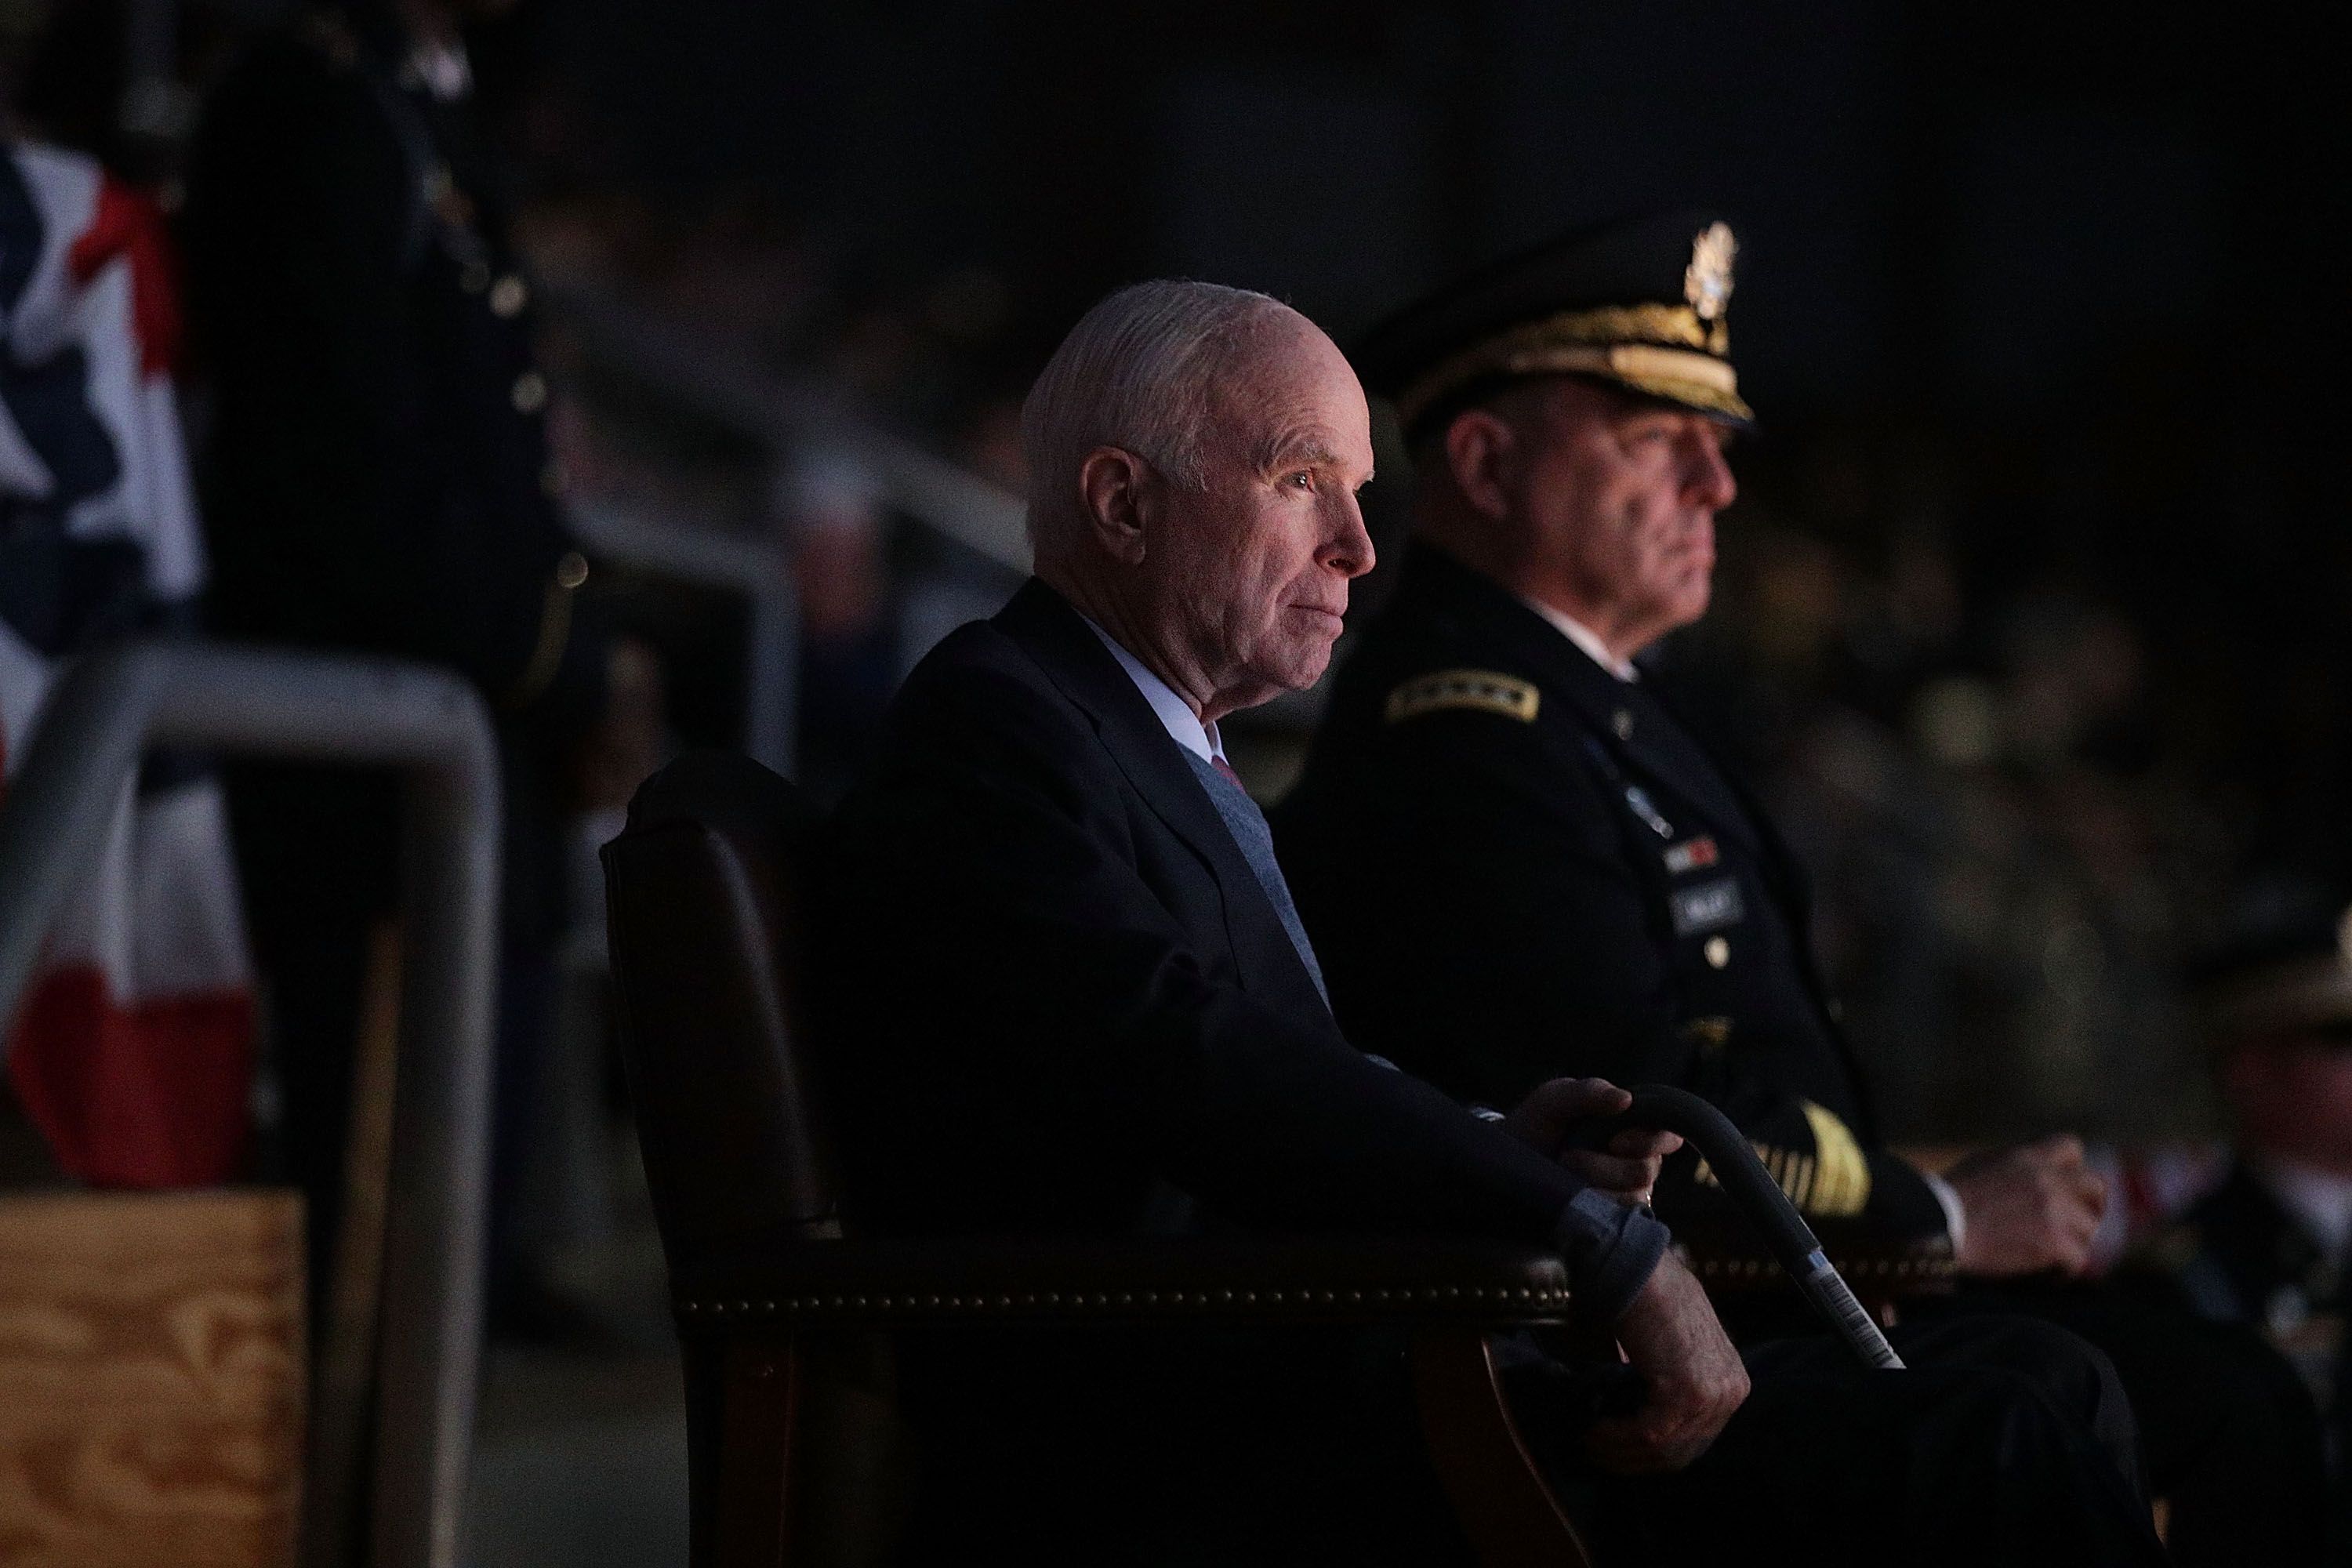 ARLINGTON, VA - NOVEMBER 14: U.S. Army Chief of Staff Gen. Mark A. Milley (R) and Sen. John McCain (R-AZ) (L) watch a special Twilight Tattoo performance November 14, 2017 at Fort Myer in Arlington, Virginia. Sen. McCain was honored with the Outstanding Civilian Service Medal for over 63 years of dedicated service to the nation and the U.S. Navy. (Photo by Alex Wong/Getty Images)